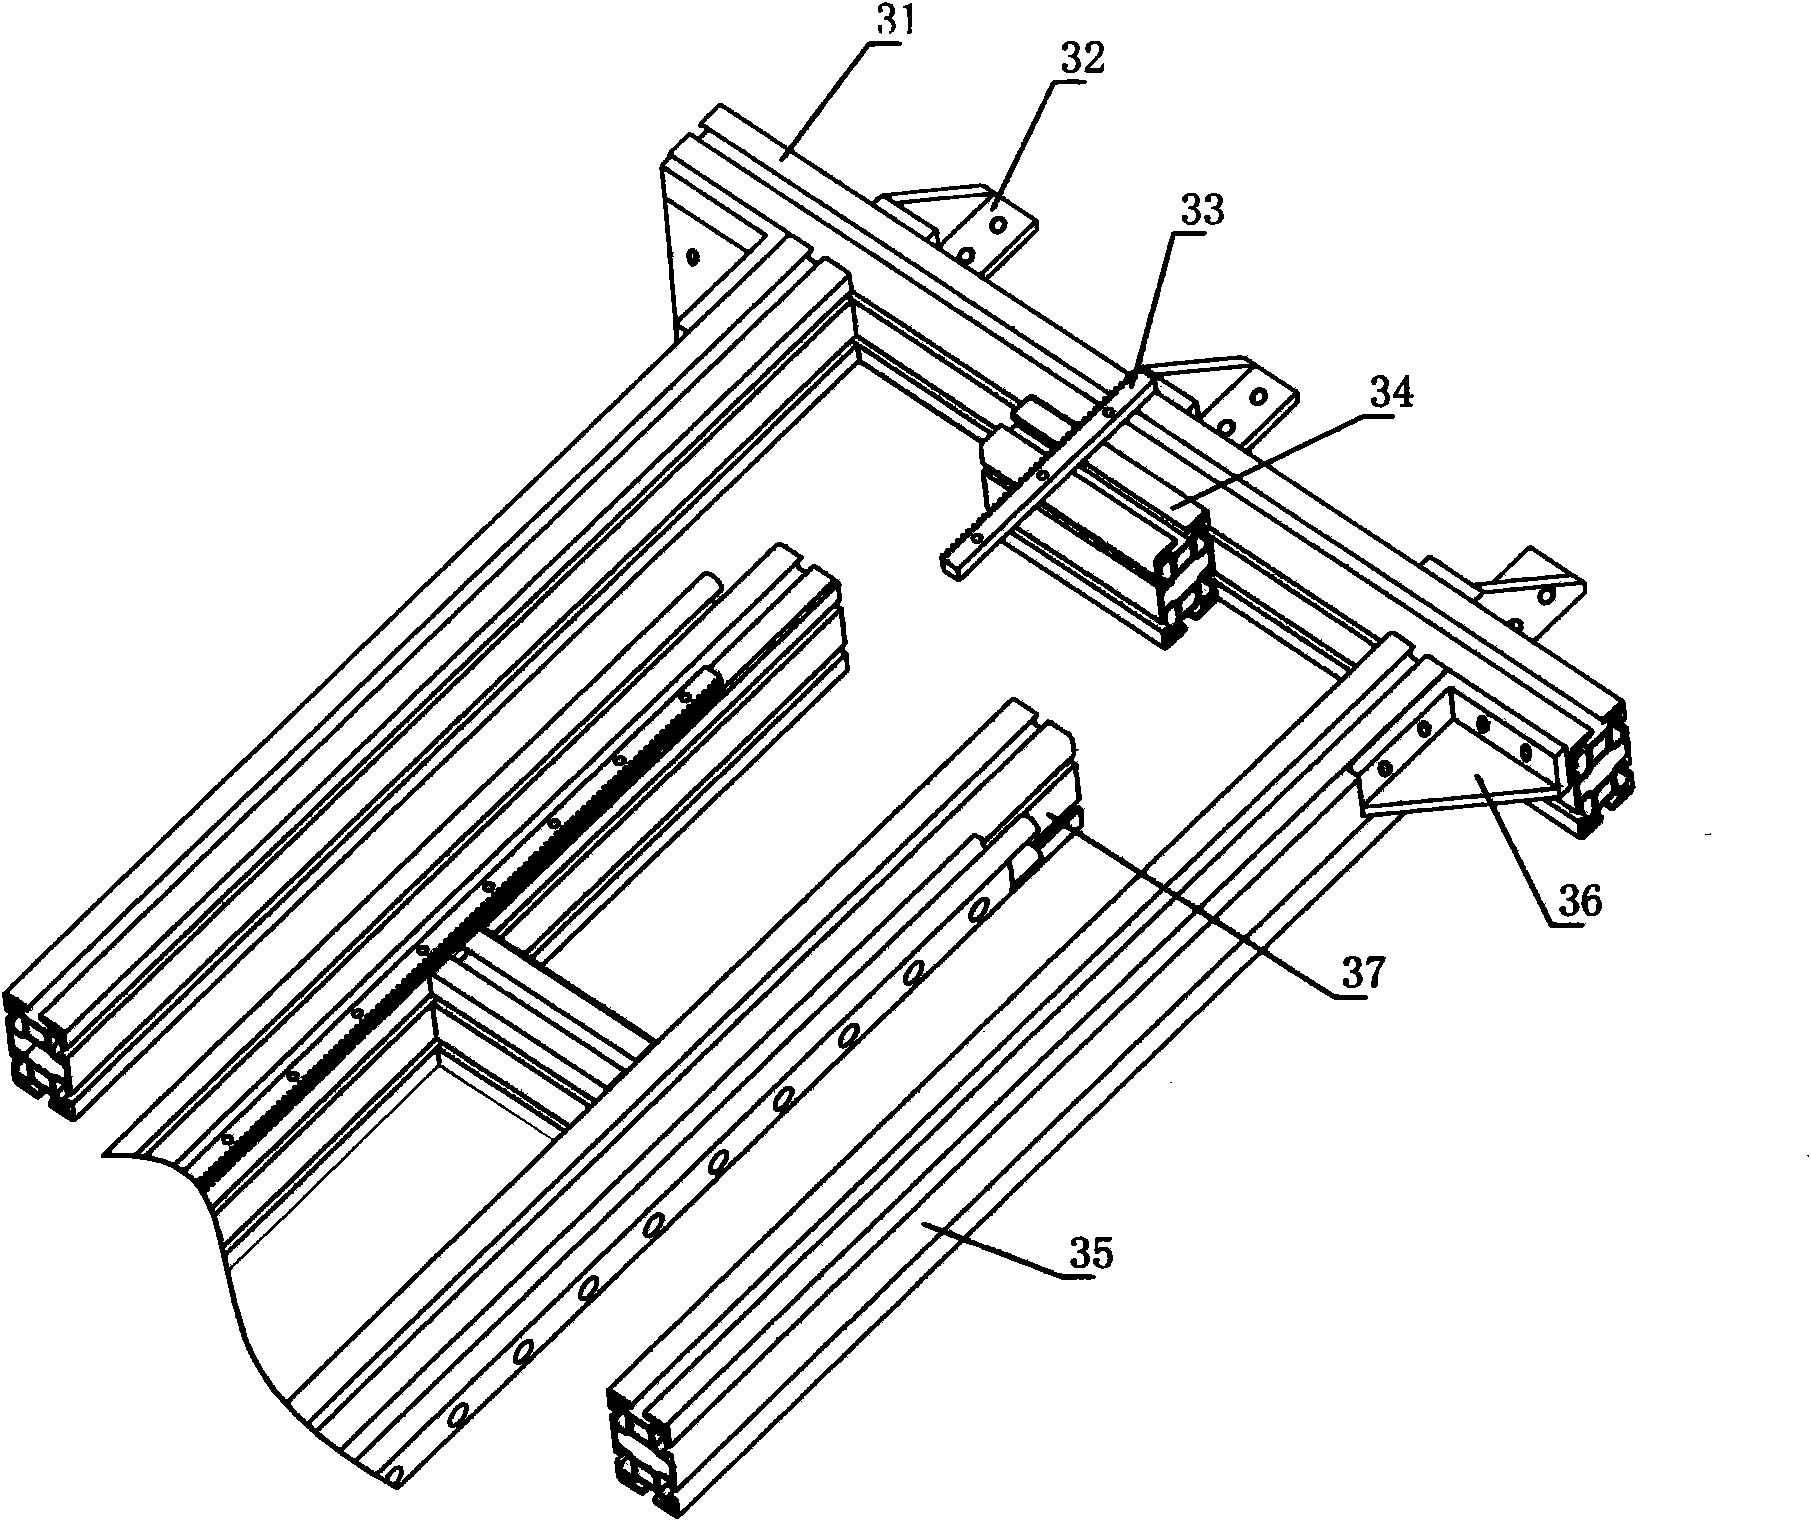 Portable spliced guide rail, butt joint method and work fixture